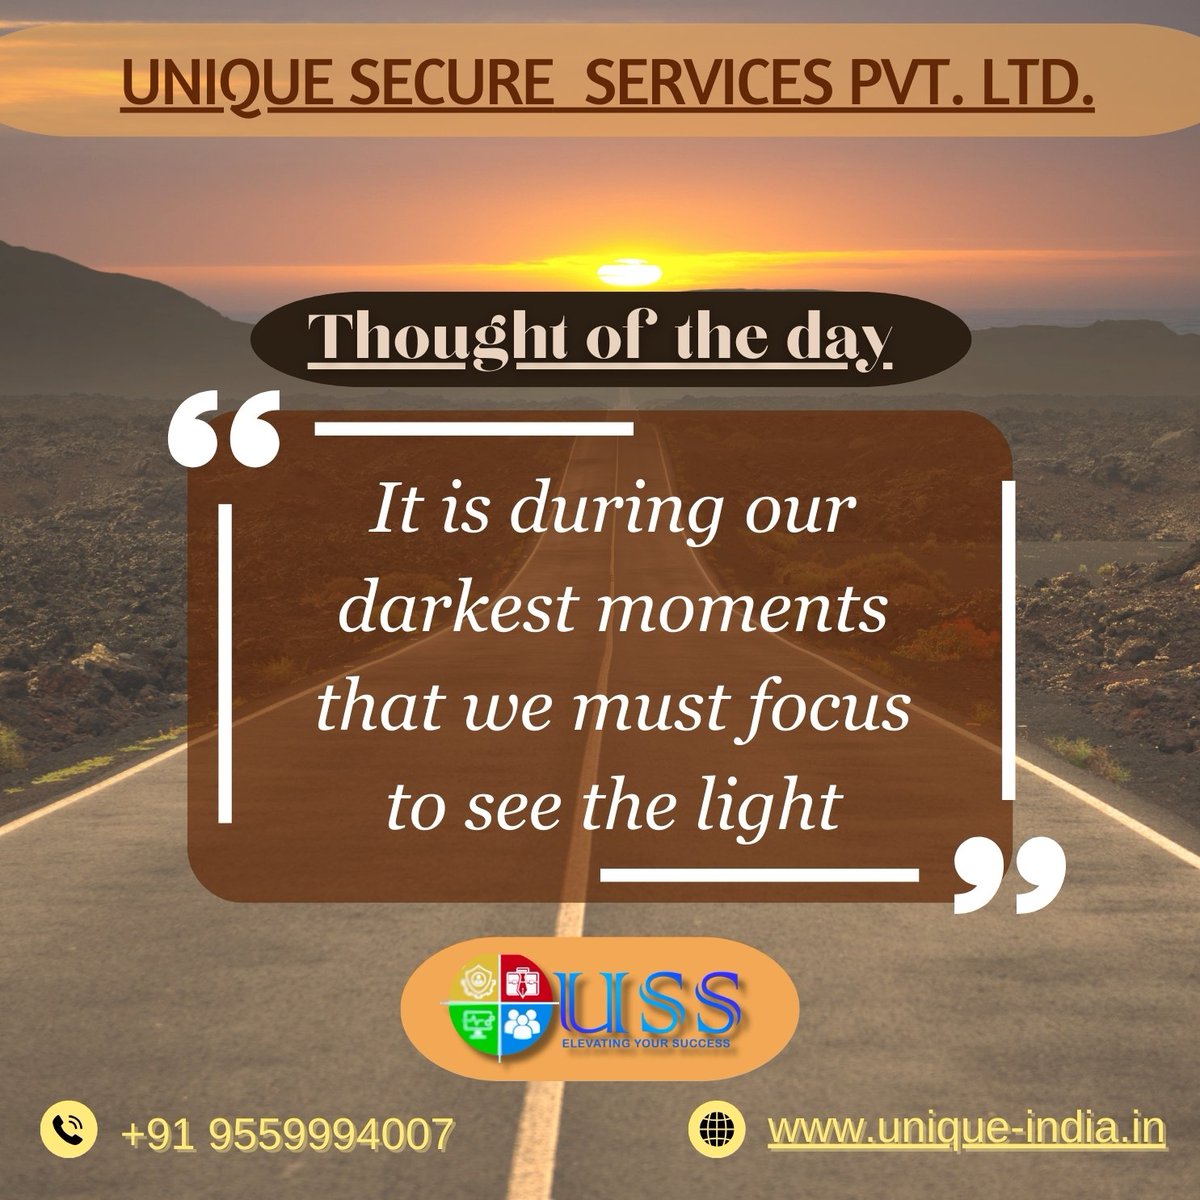 Darkness is just a dimmer switch on the light of possibility. Sharpen your focus and find your way out!
.
.
.
#usspl #ThoughtForTheDay  #FridayMotivation  #DarkestBeforeDawn #MotivationMonday #Resilience #FindYourLight